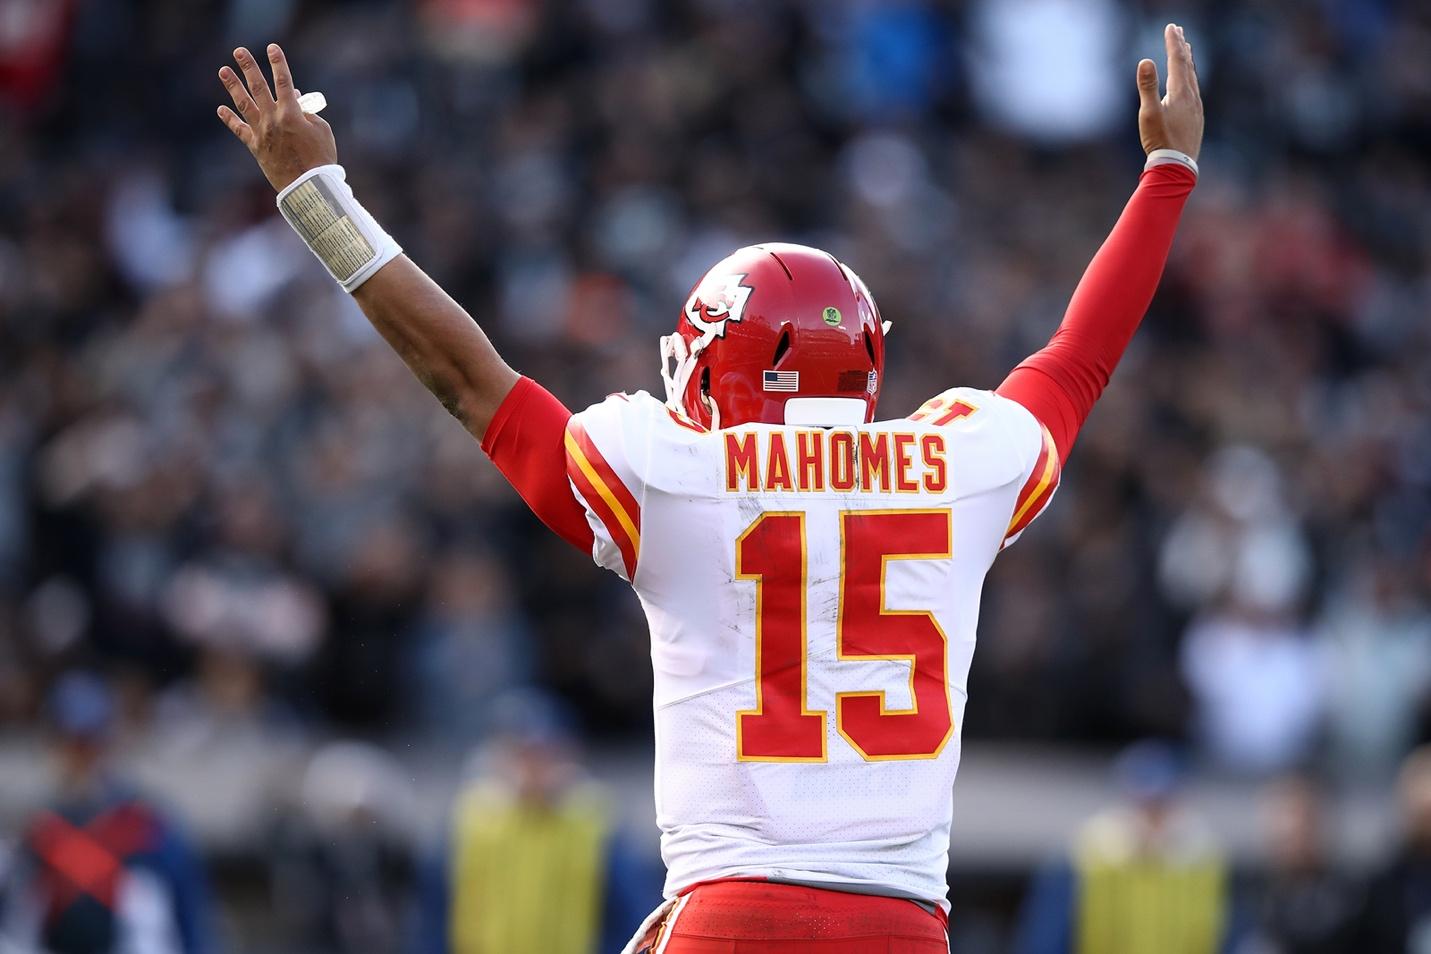 Should Patrick Mahomes be considered the best quarterback in the NFL?